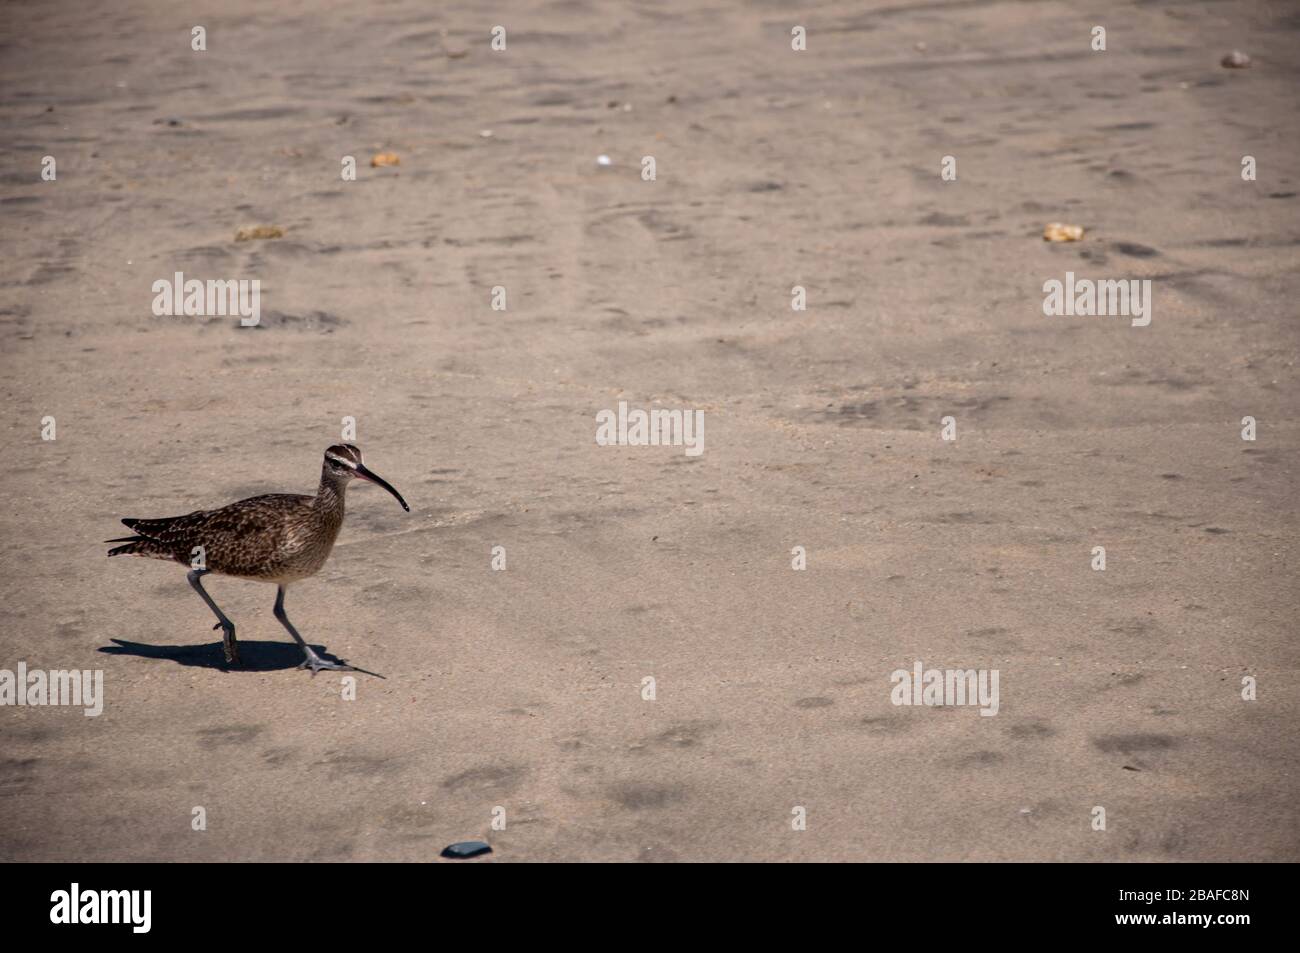 Bristle-thighed curlew standing on the sand under the sunlight with a blurry background Stock Photo